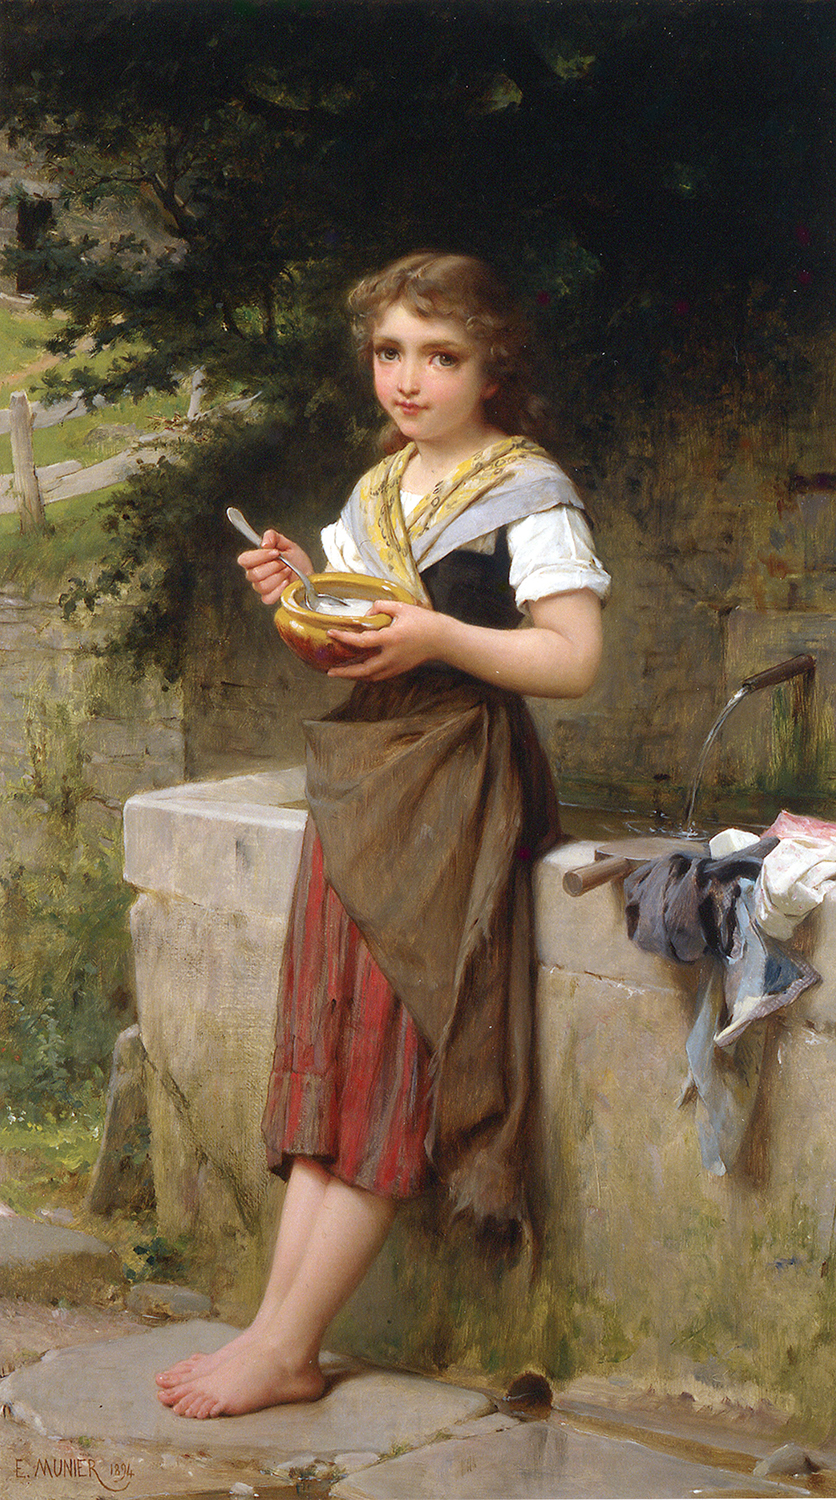 A young girl eating food from a bowl in a landscape - La jeune paysanne - Emile Munier